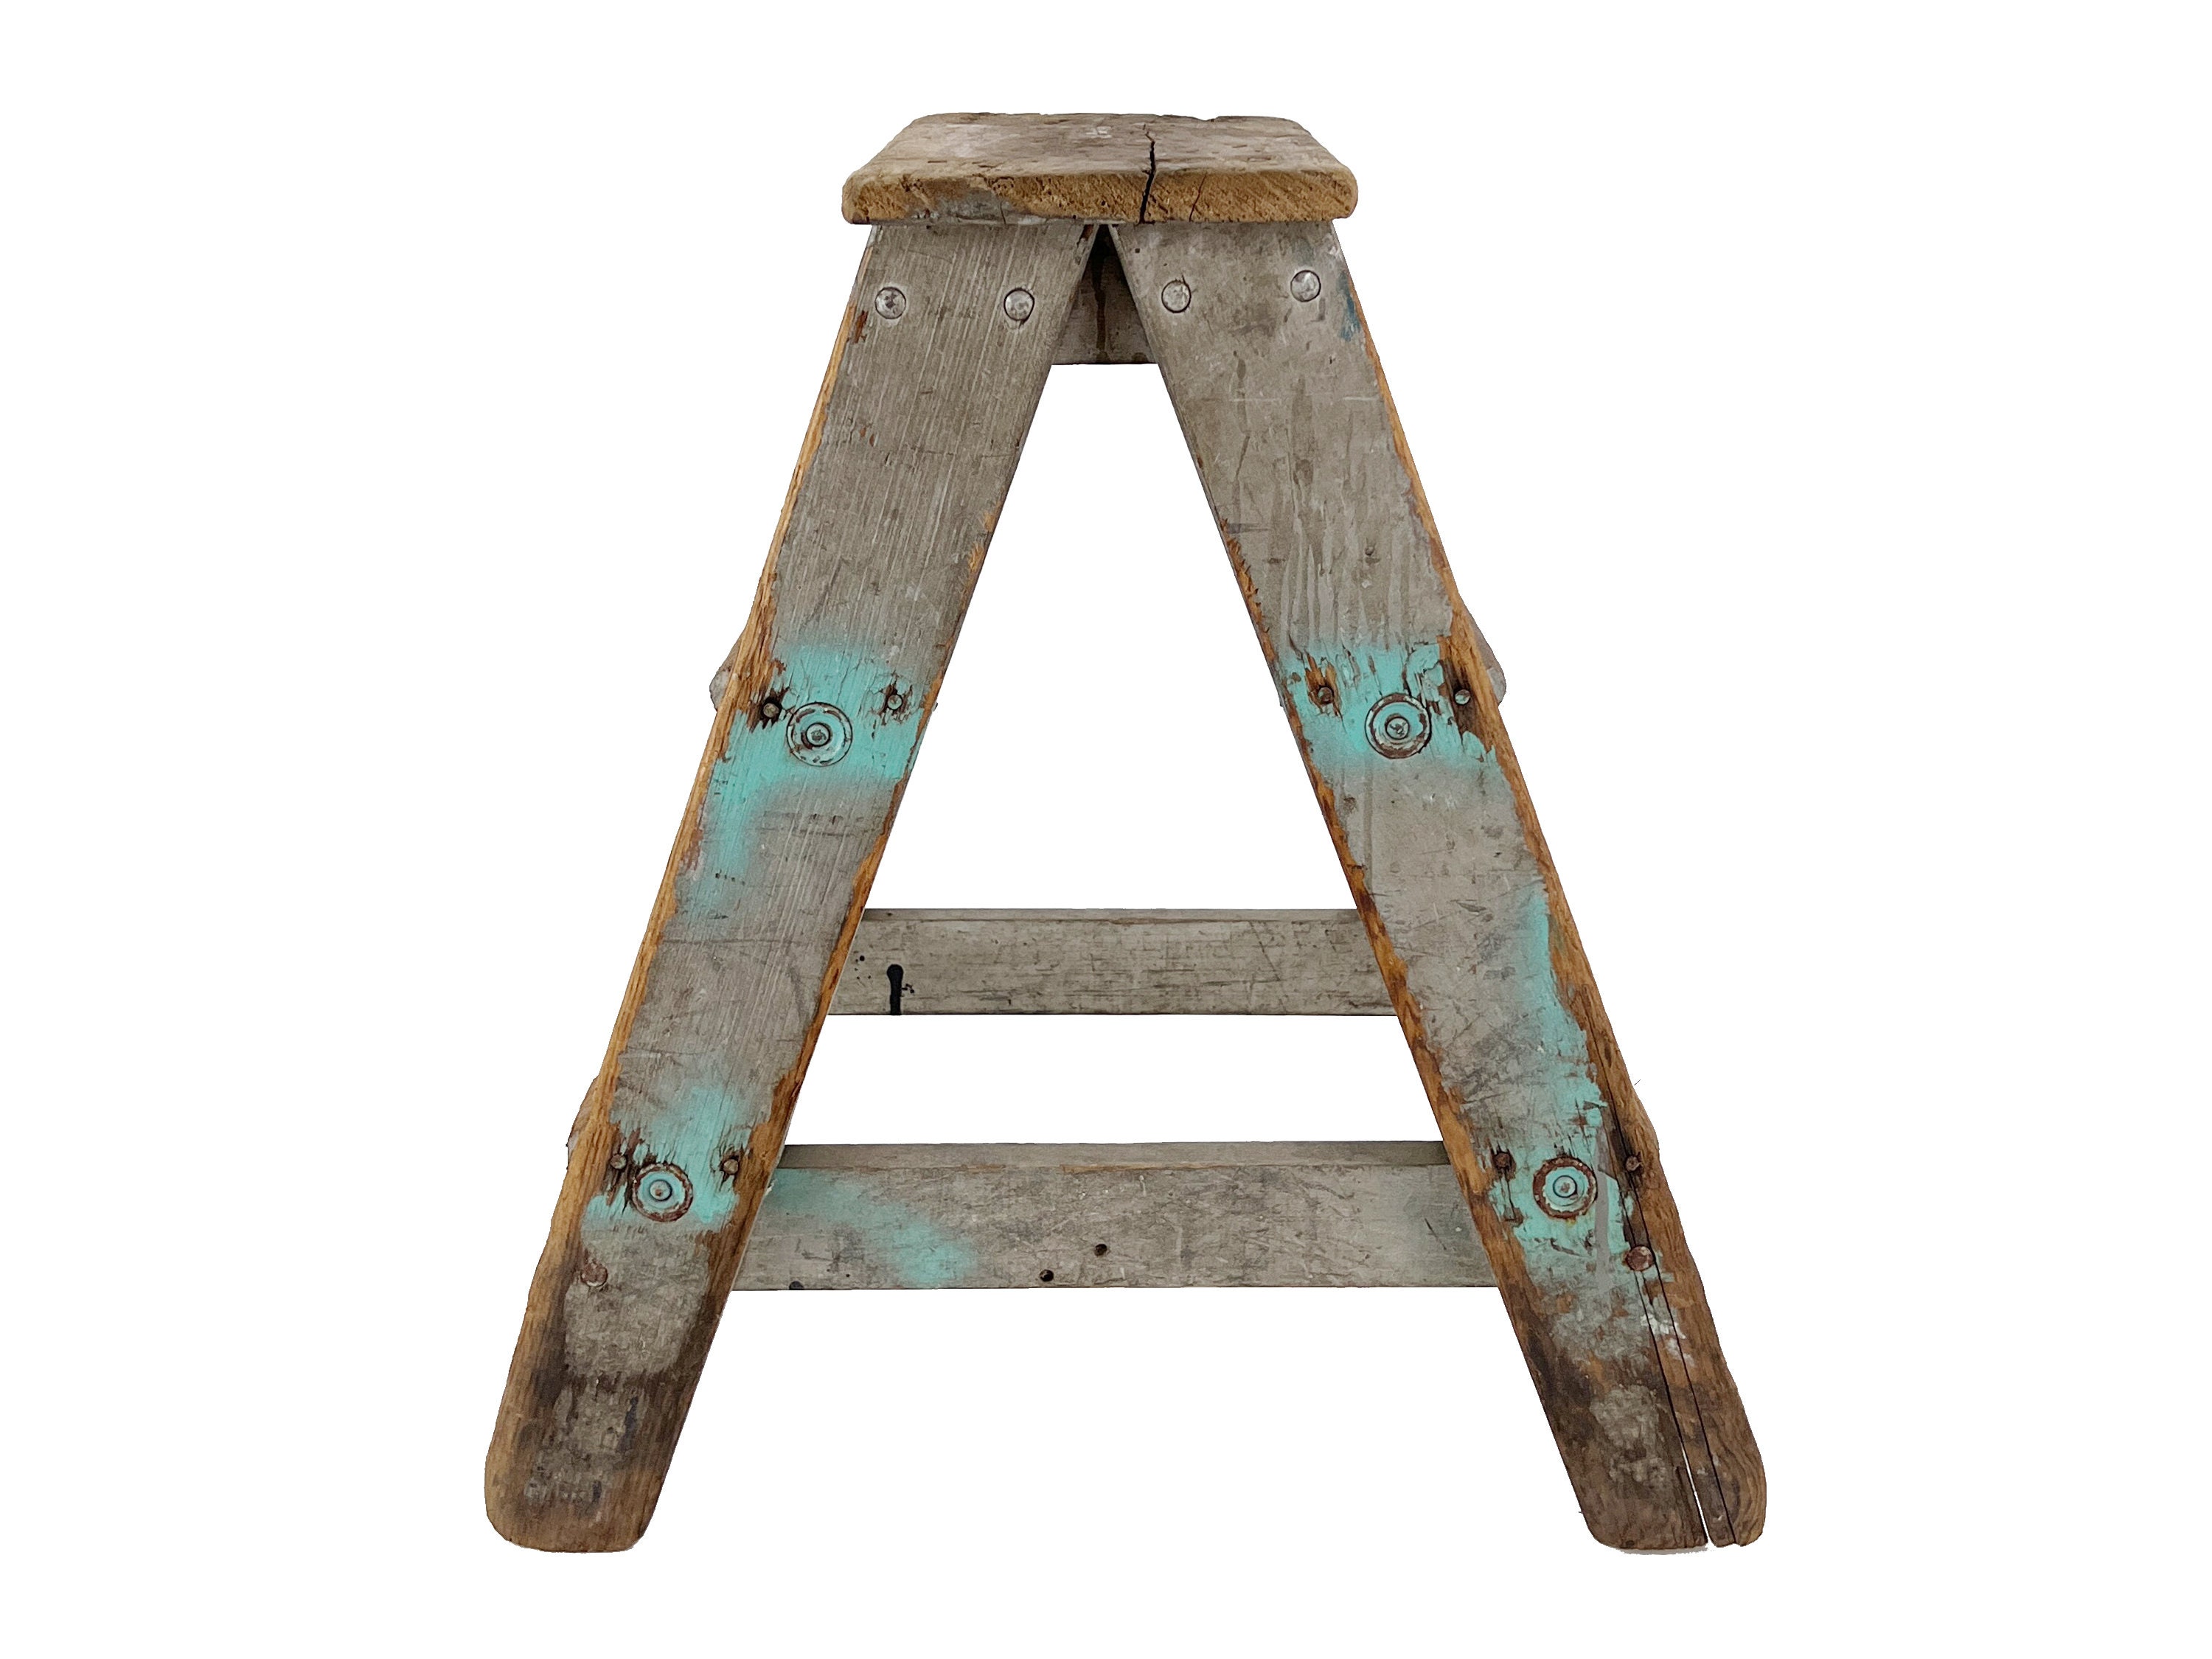 Vintage Wooden Step Ladder with Original Paint - 1960's in General